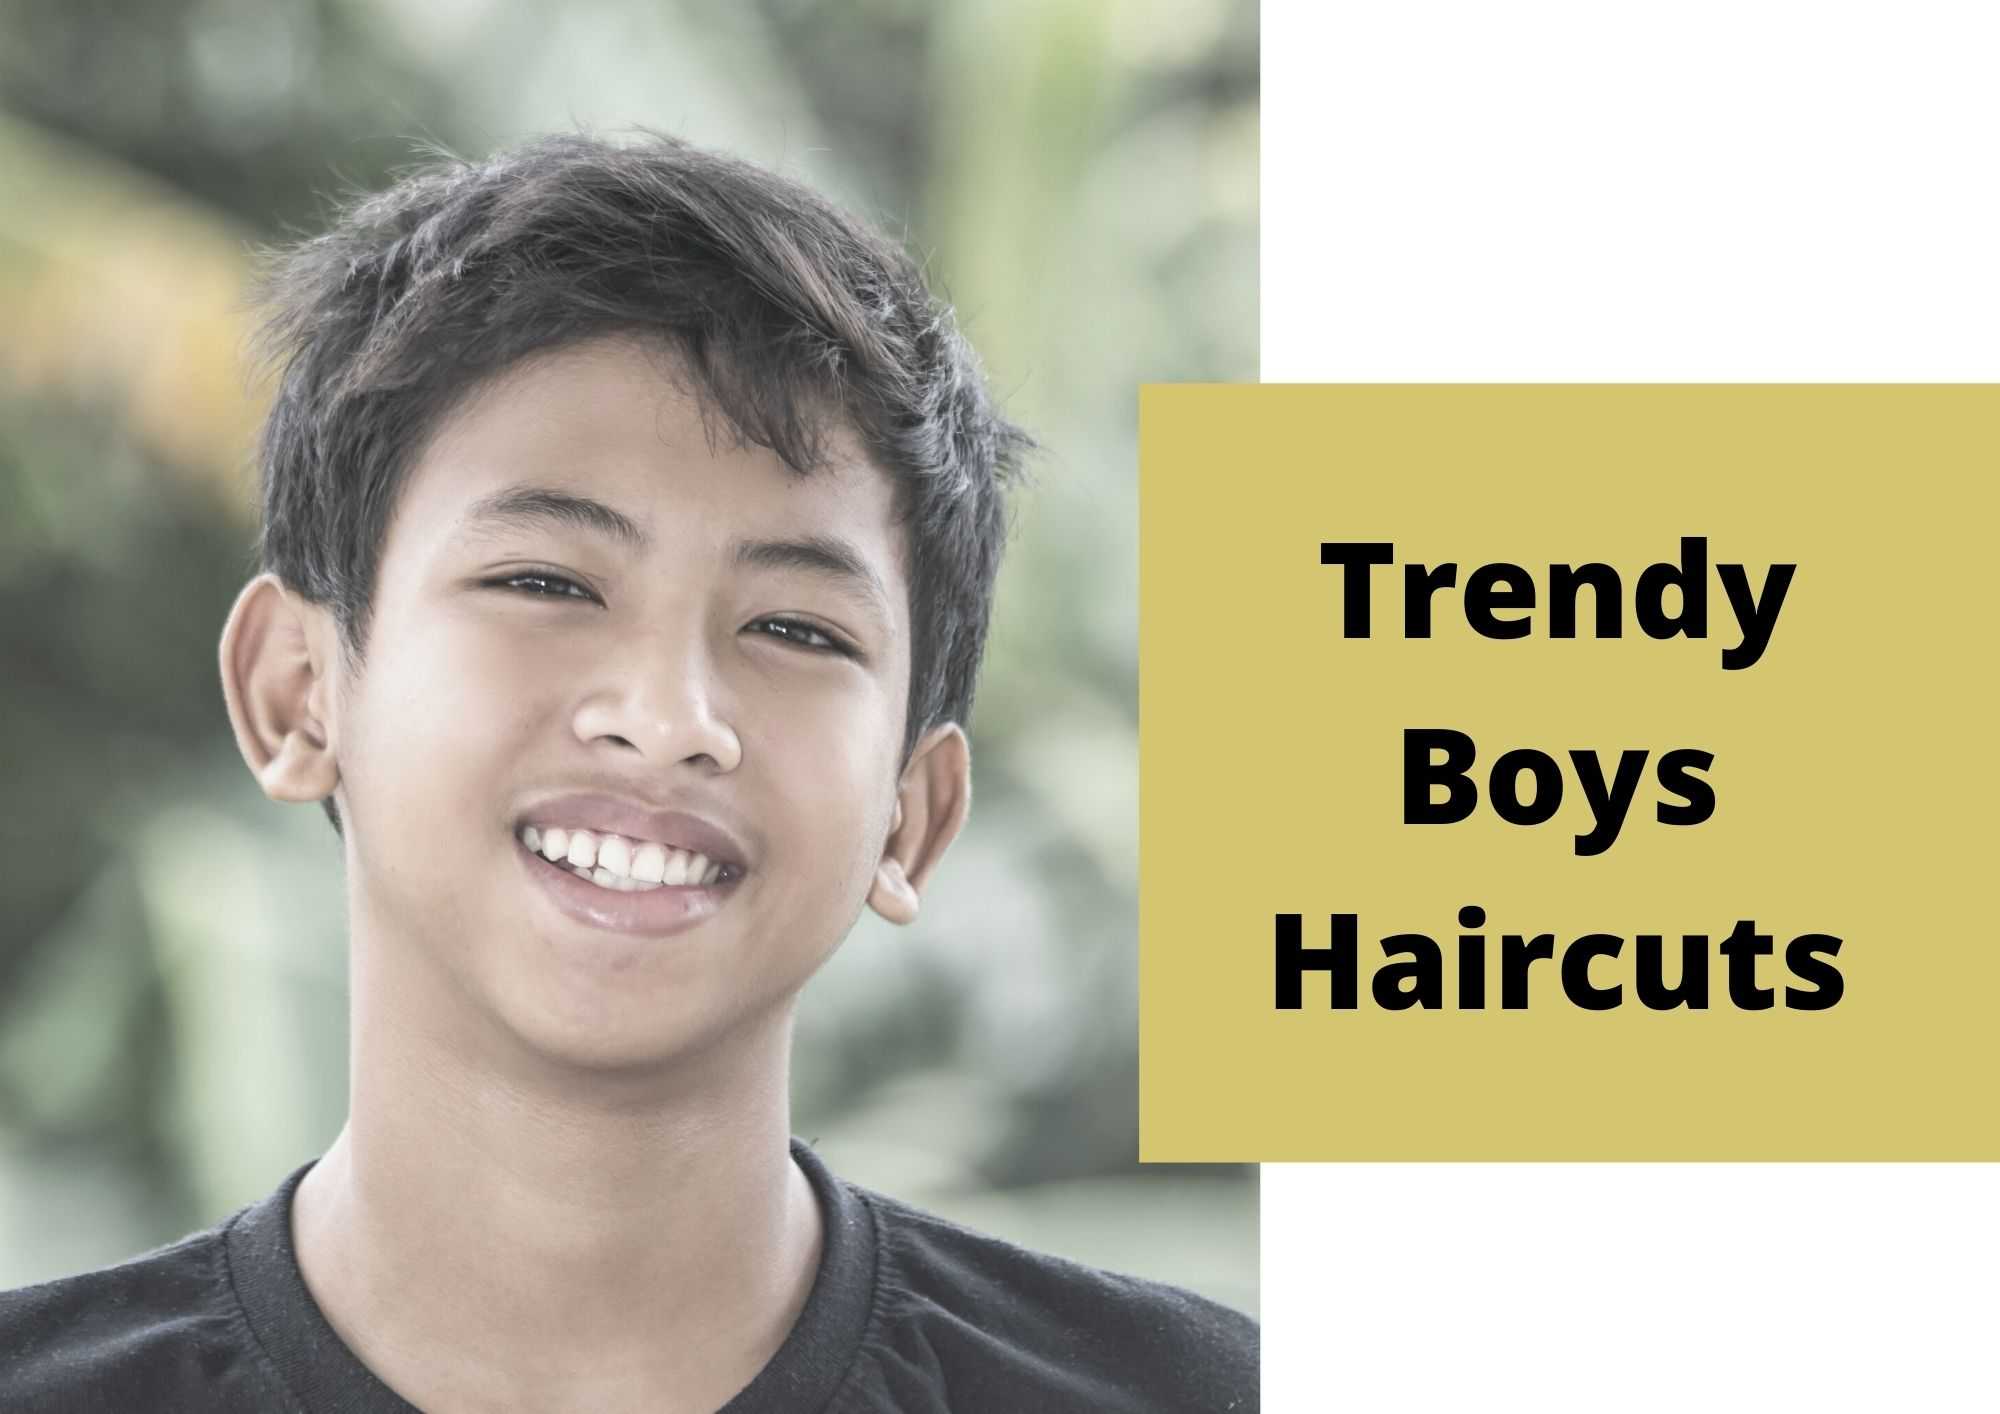 15 Stylish Longer Haircuts for Boys in 2023 - The Trend Spotter